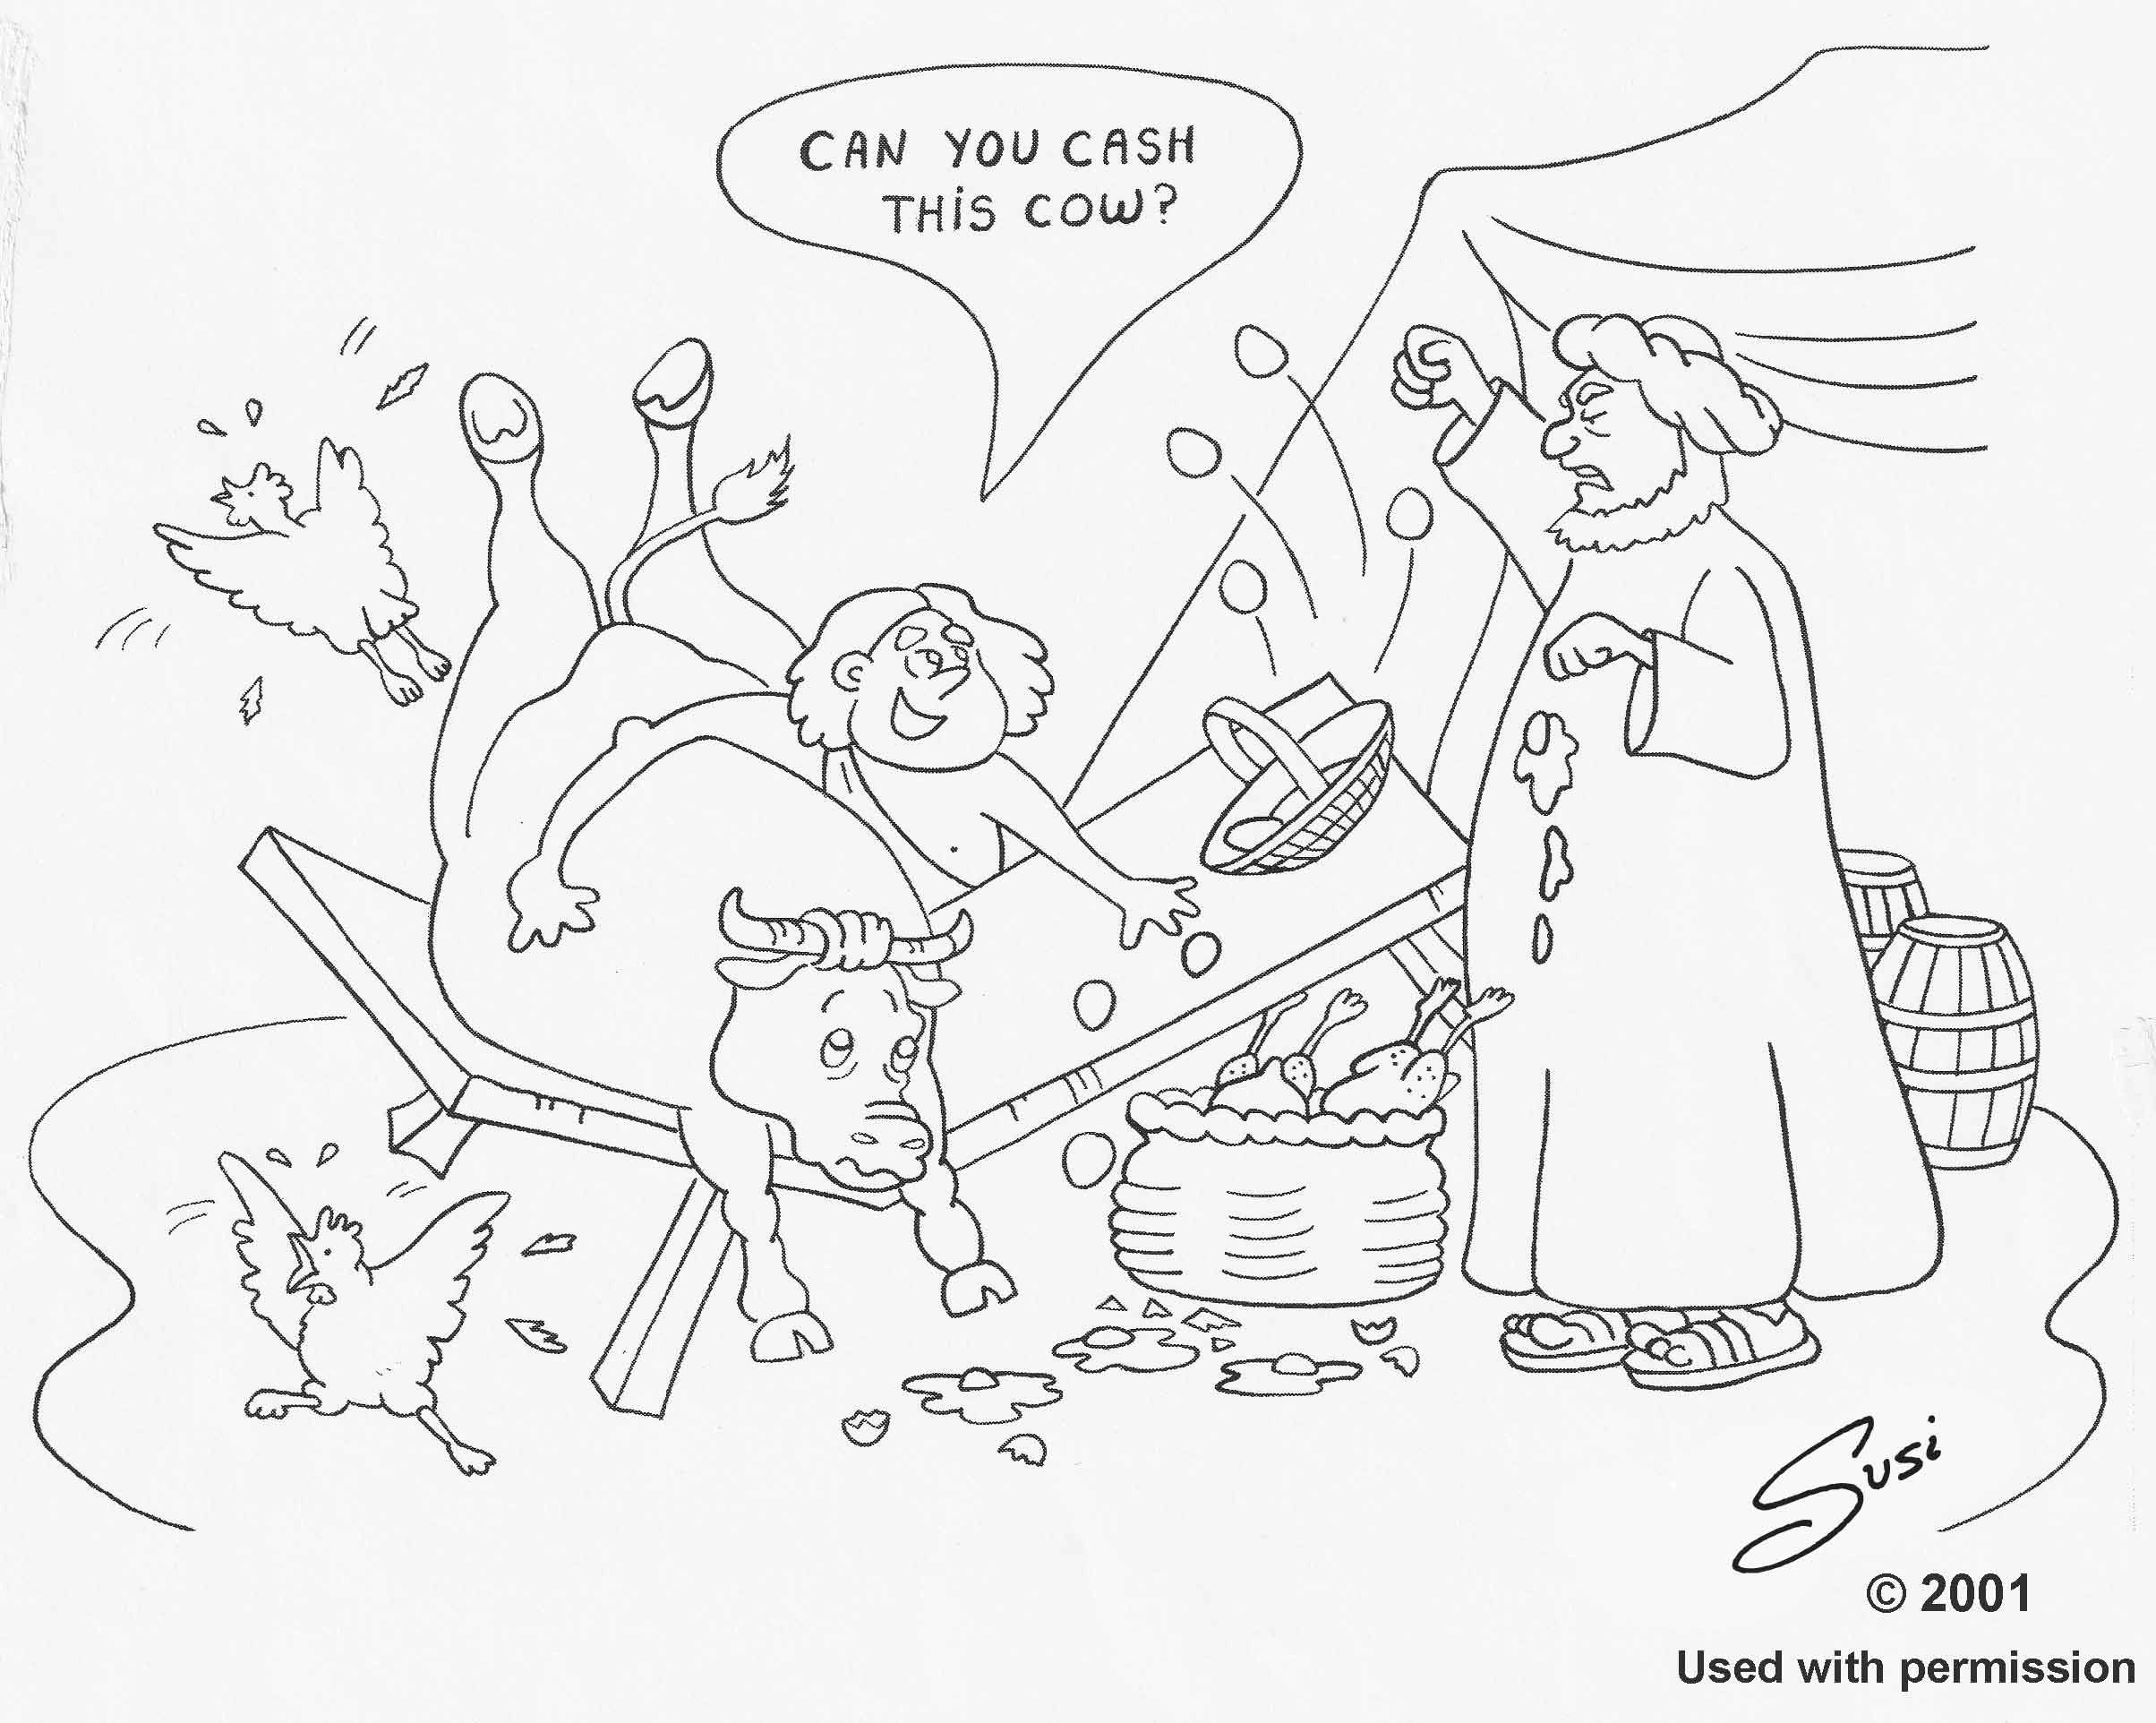 Ancient Coin Cartoon -"One of the reasons coins were invented."